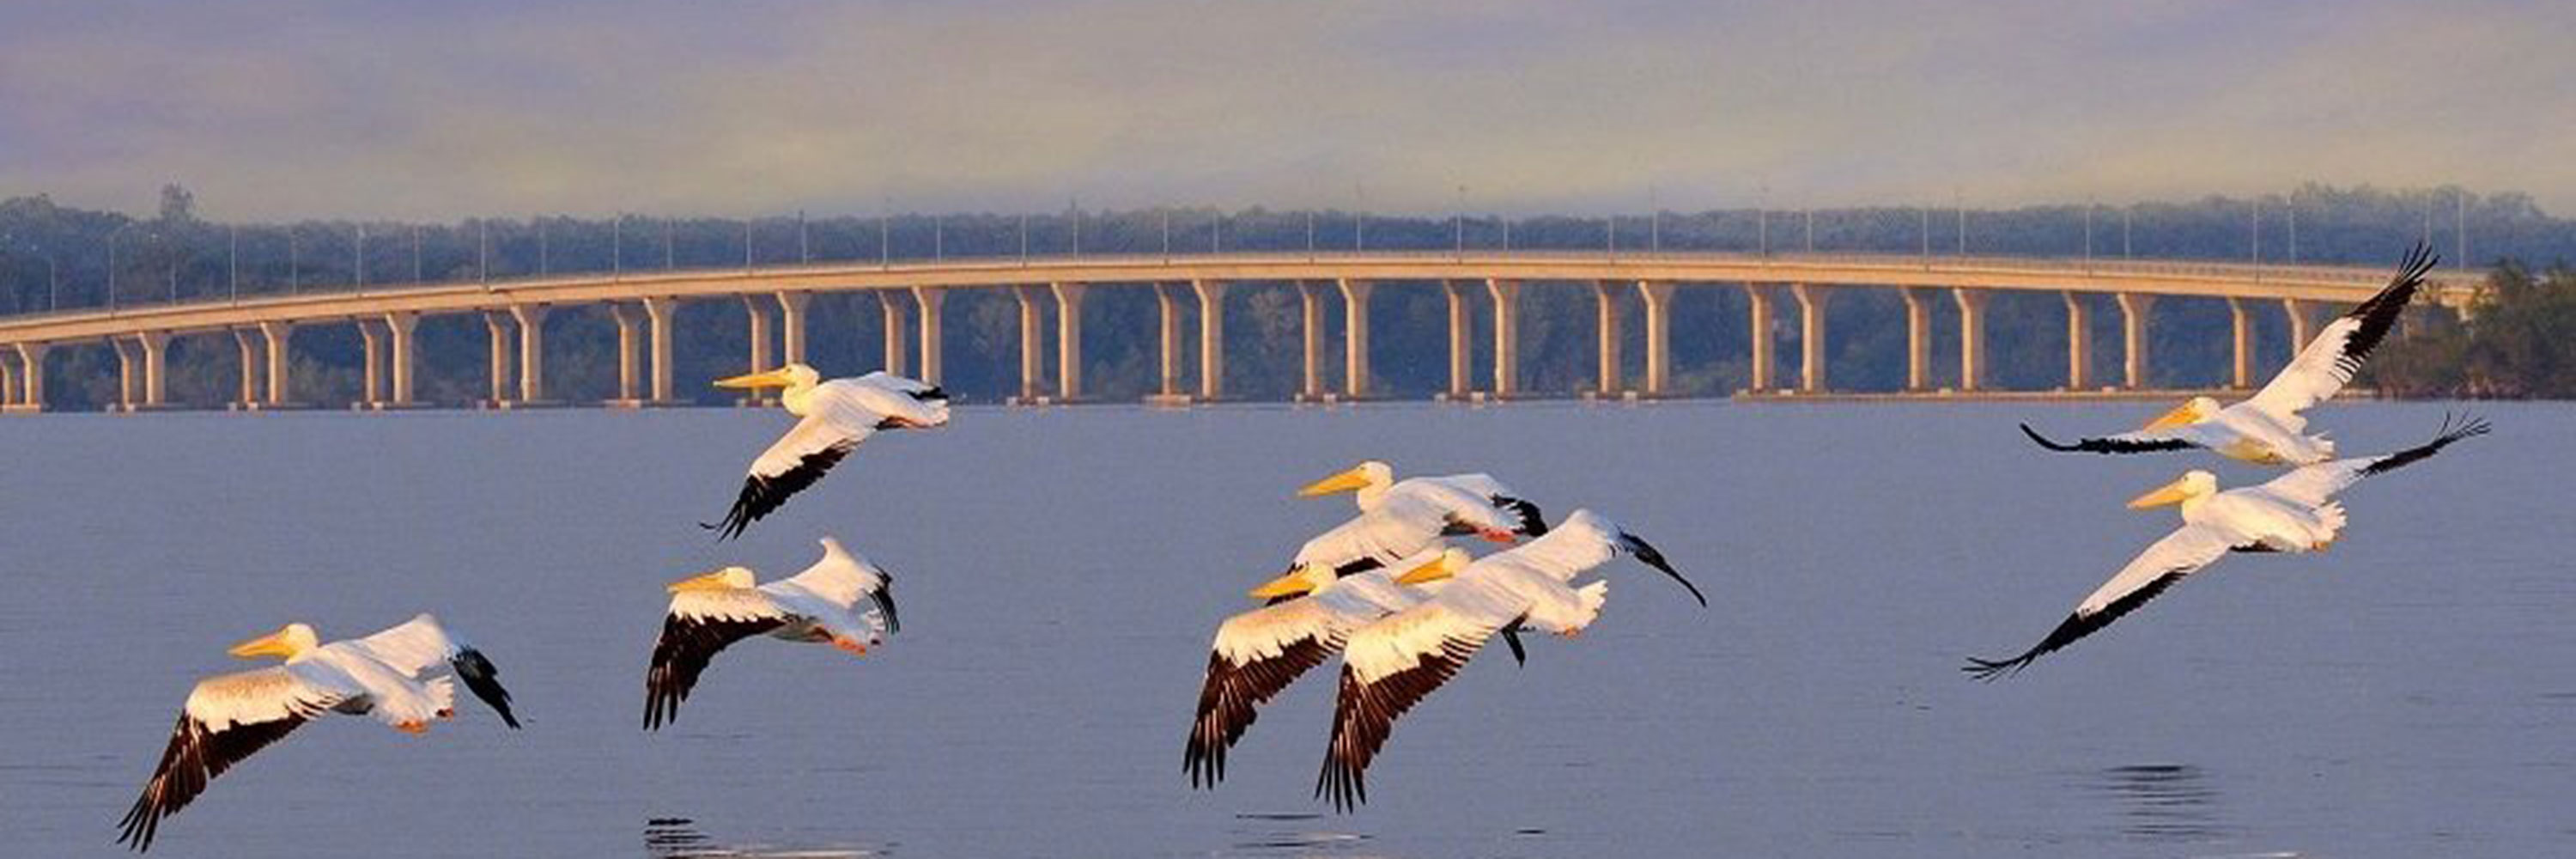 Photo of birds over water with a bridge in the background